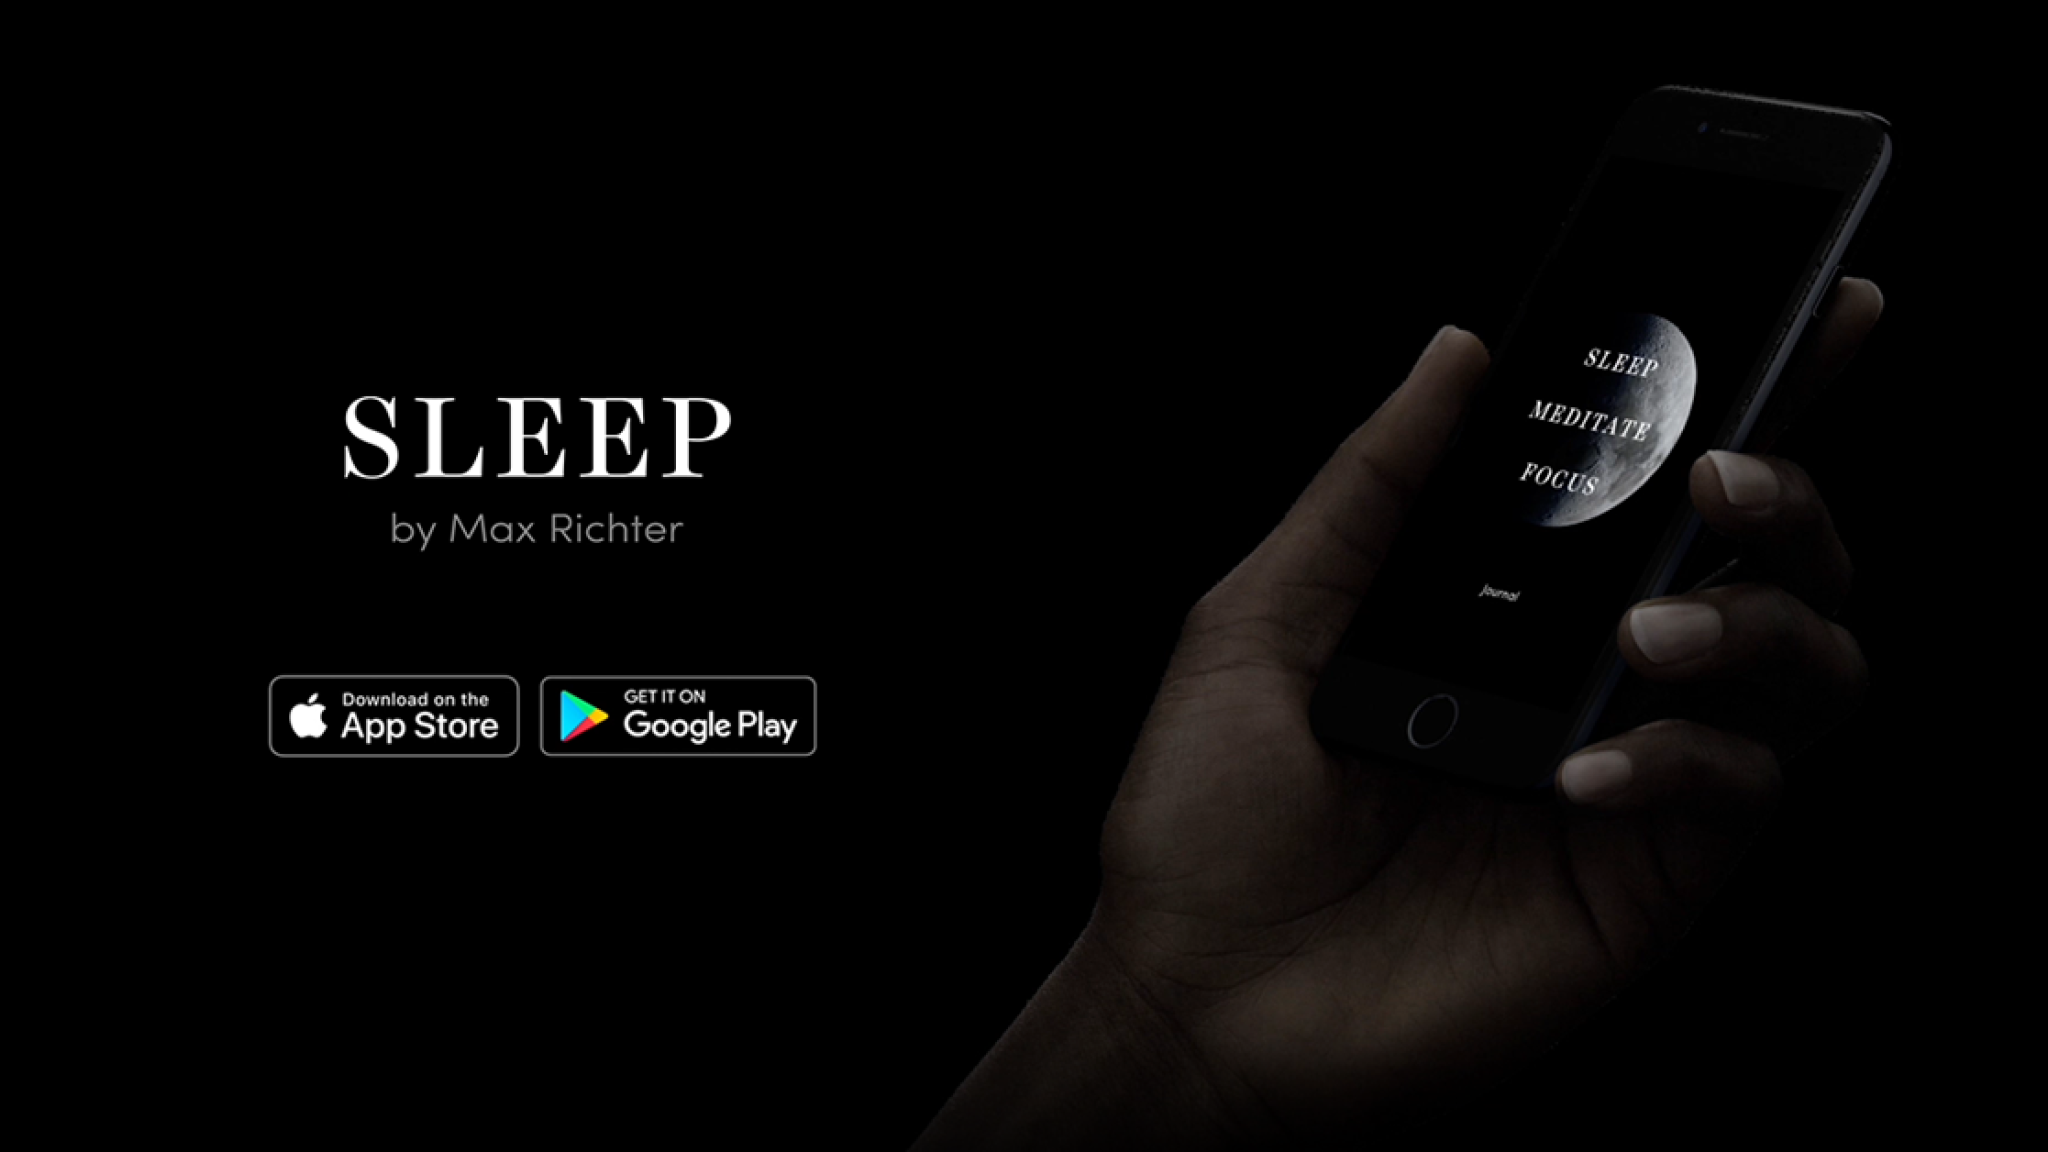 Max Richter’s ‘SLEEP’ reinvented as new iOS and android mobile app